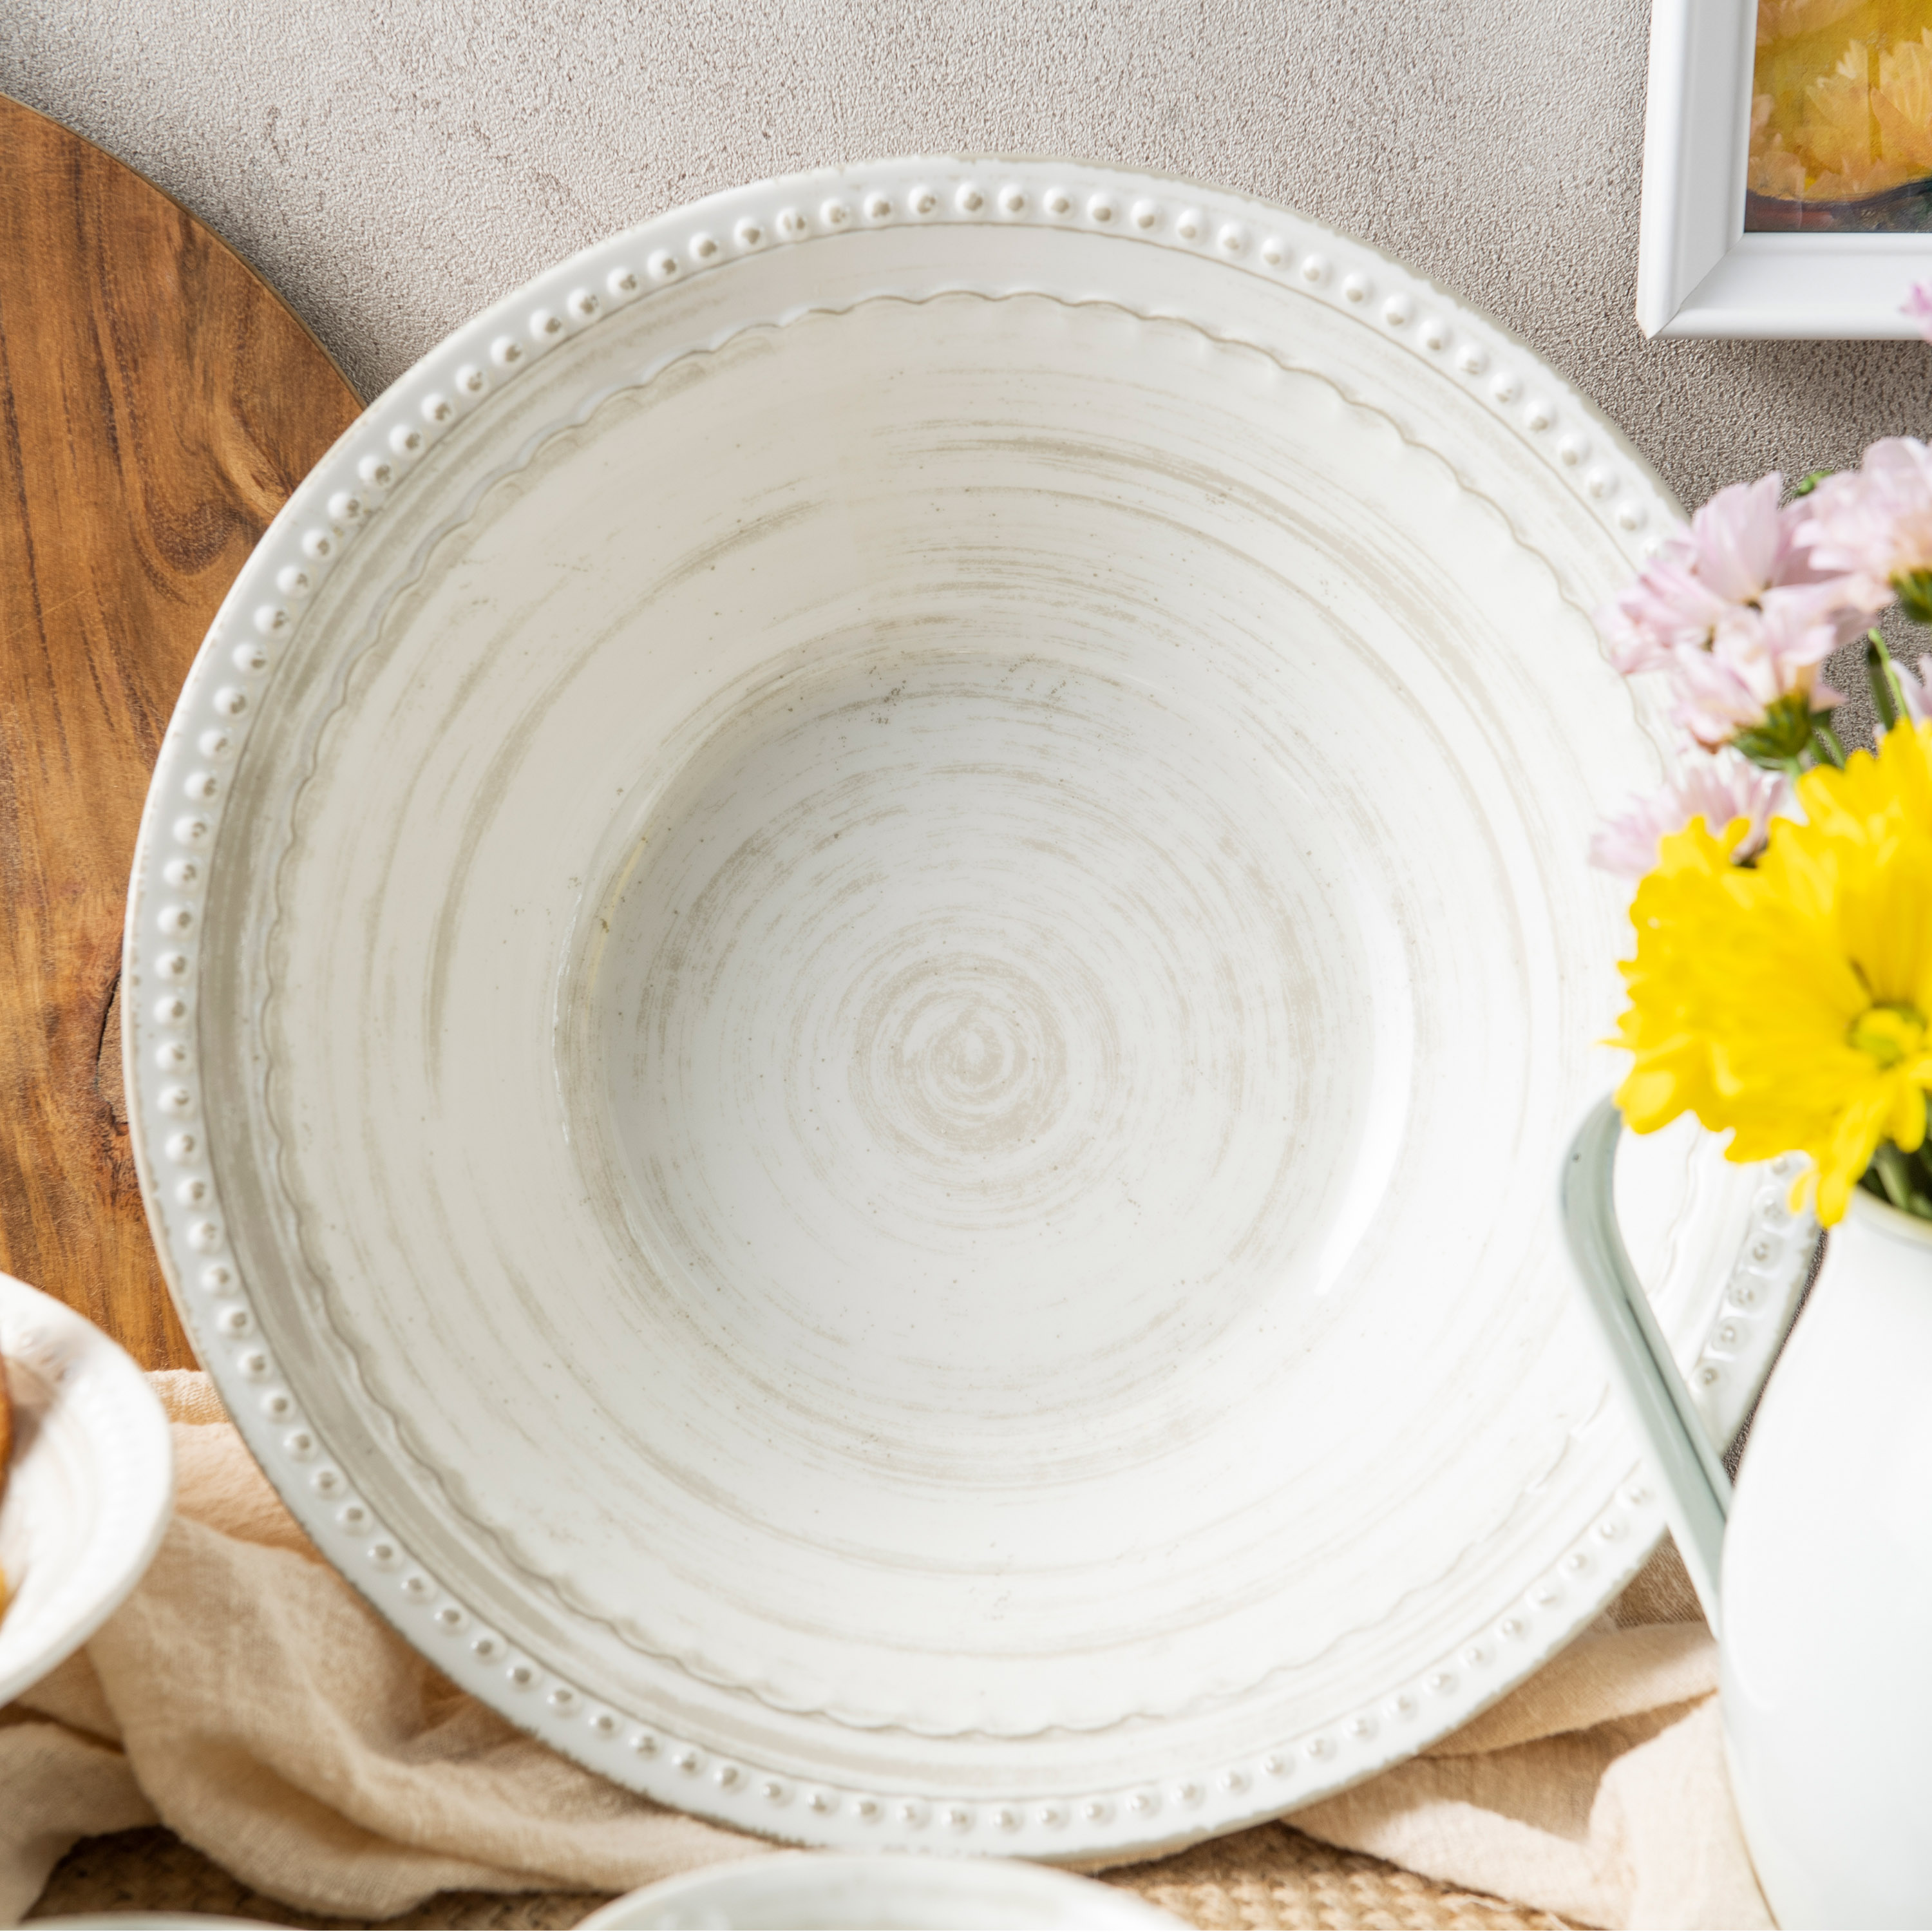 French Country 12-inch Melamine Serving Bowls, White, 2-piece set slideshow image 3